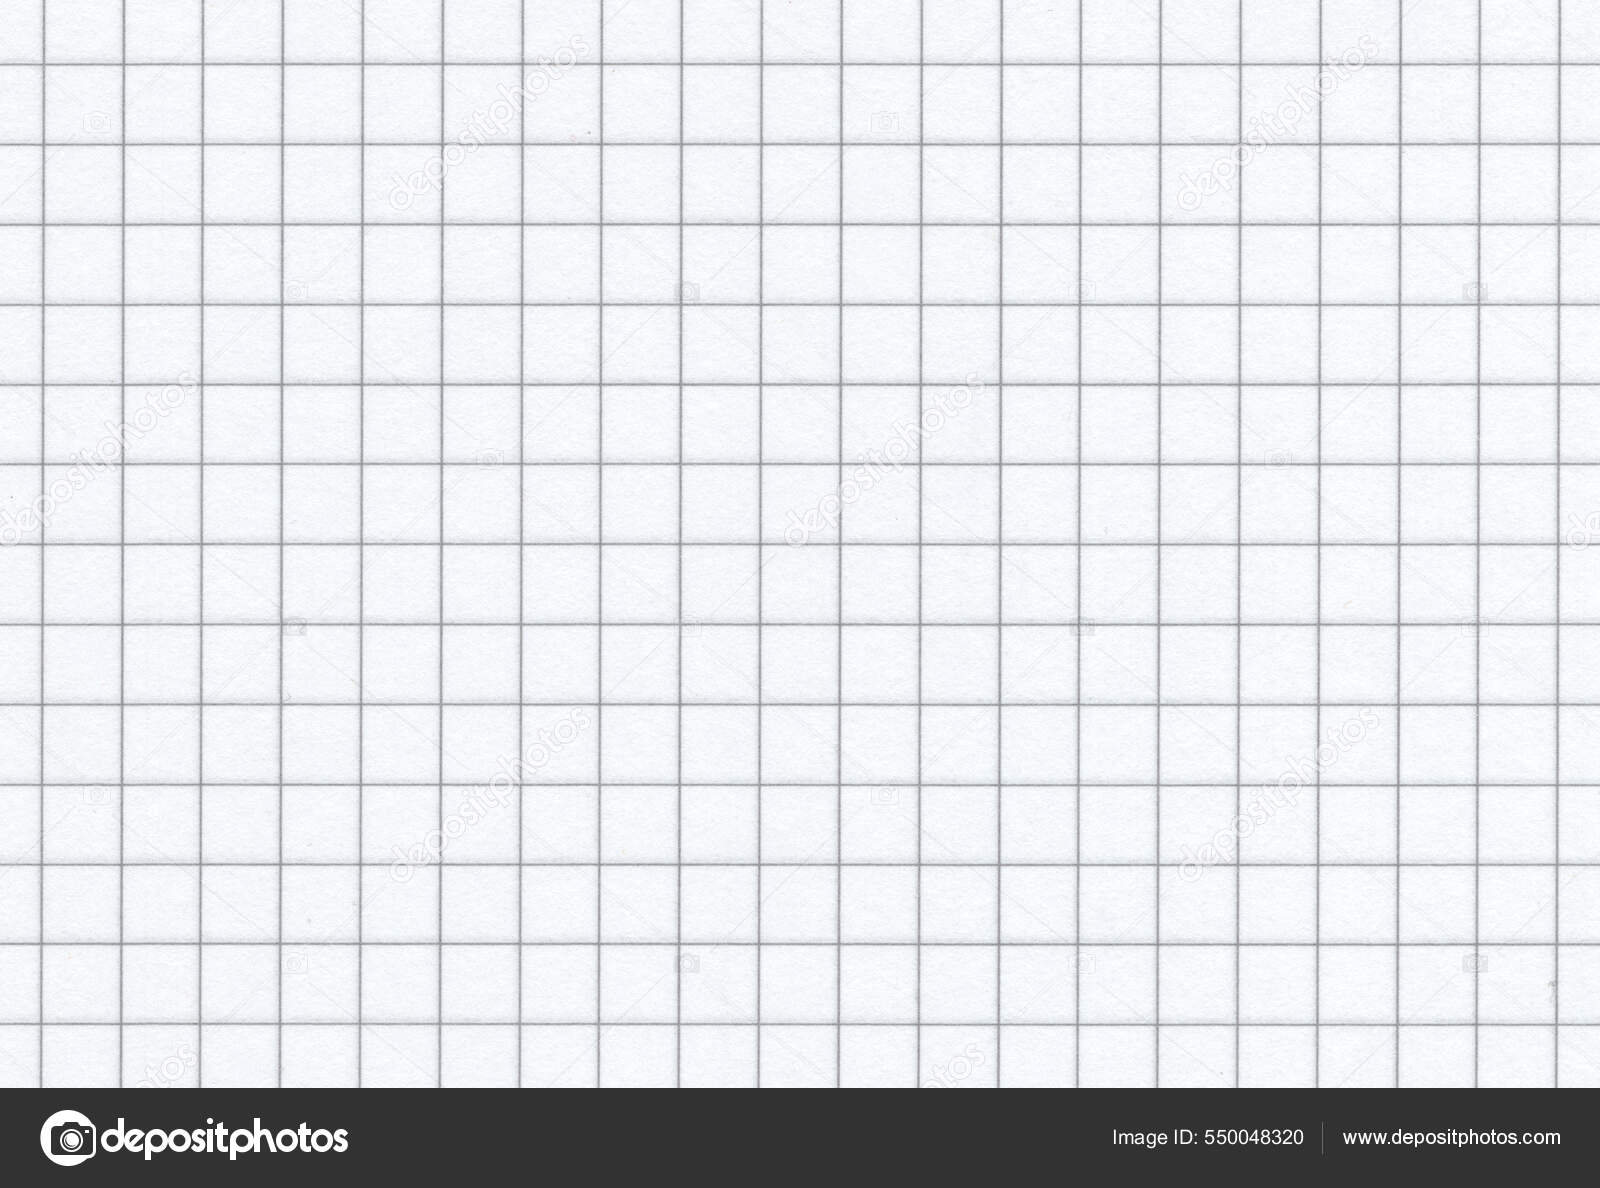 Blank white notebook grid paper background. Stock Photo by ©Bisams 550048320